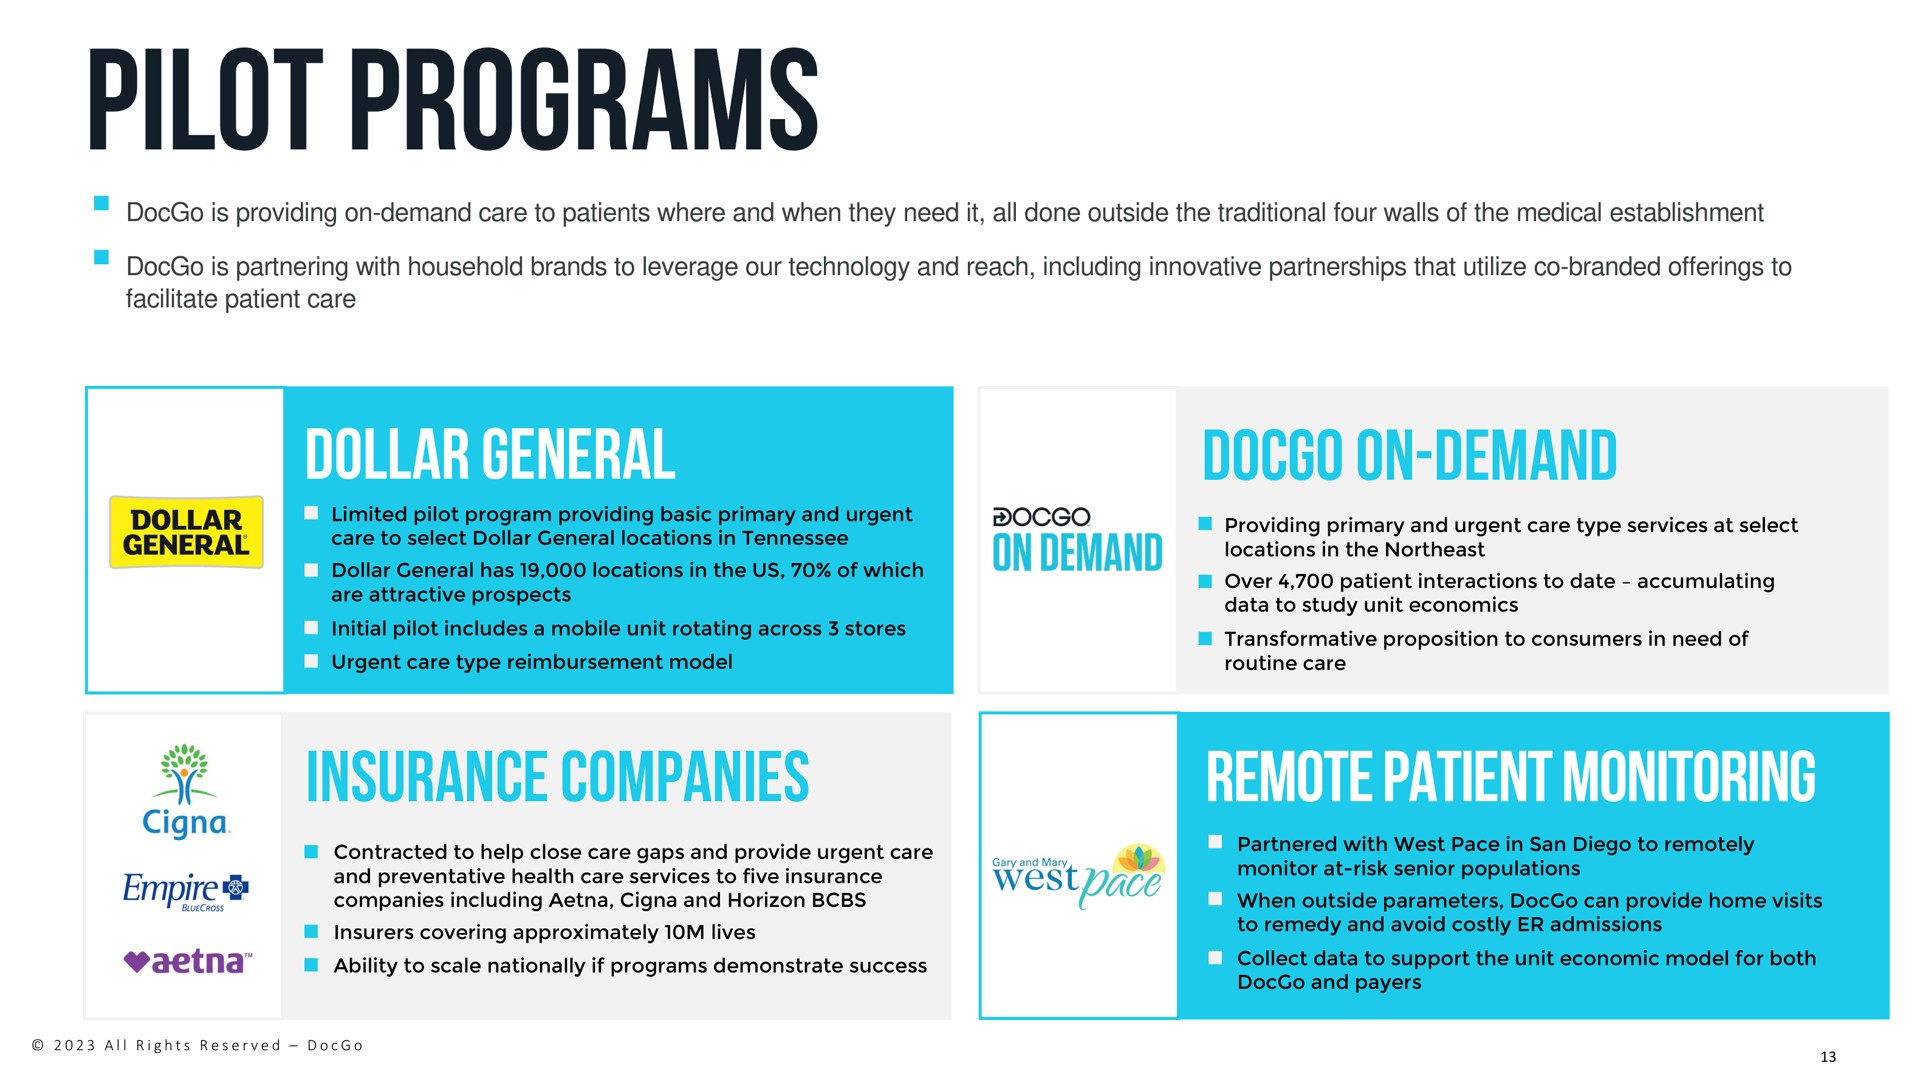 pilot programs dollar general insurance companies on demand remote patient monitoring | DocGo